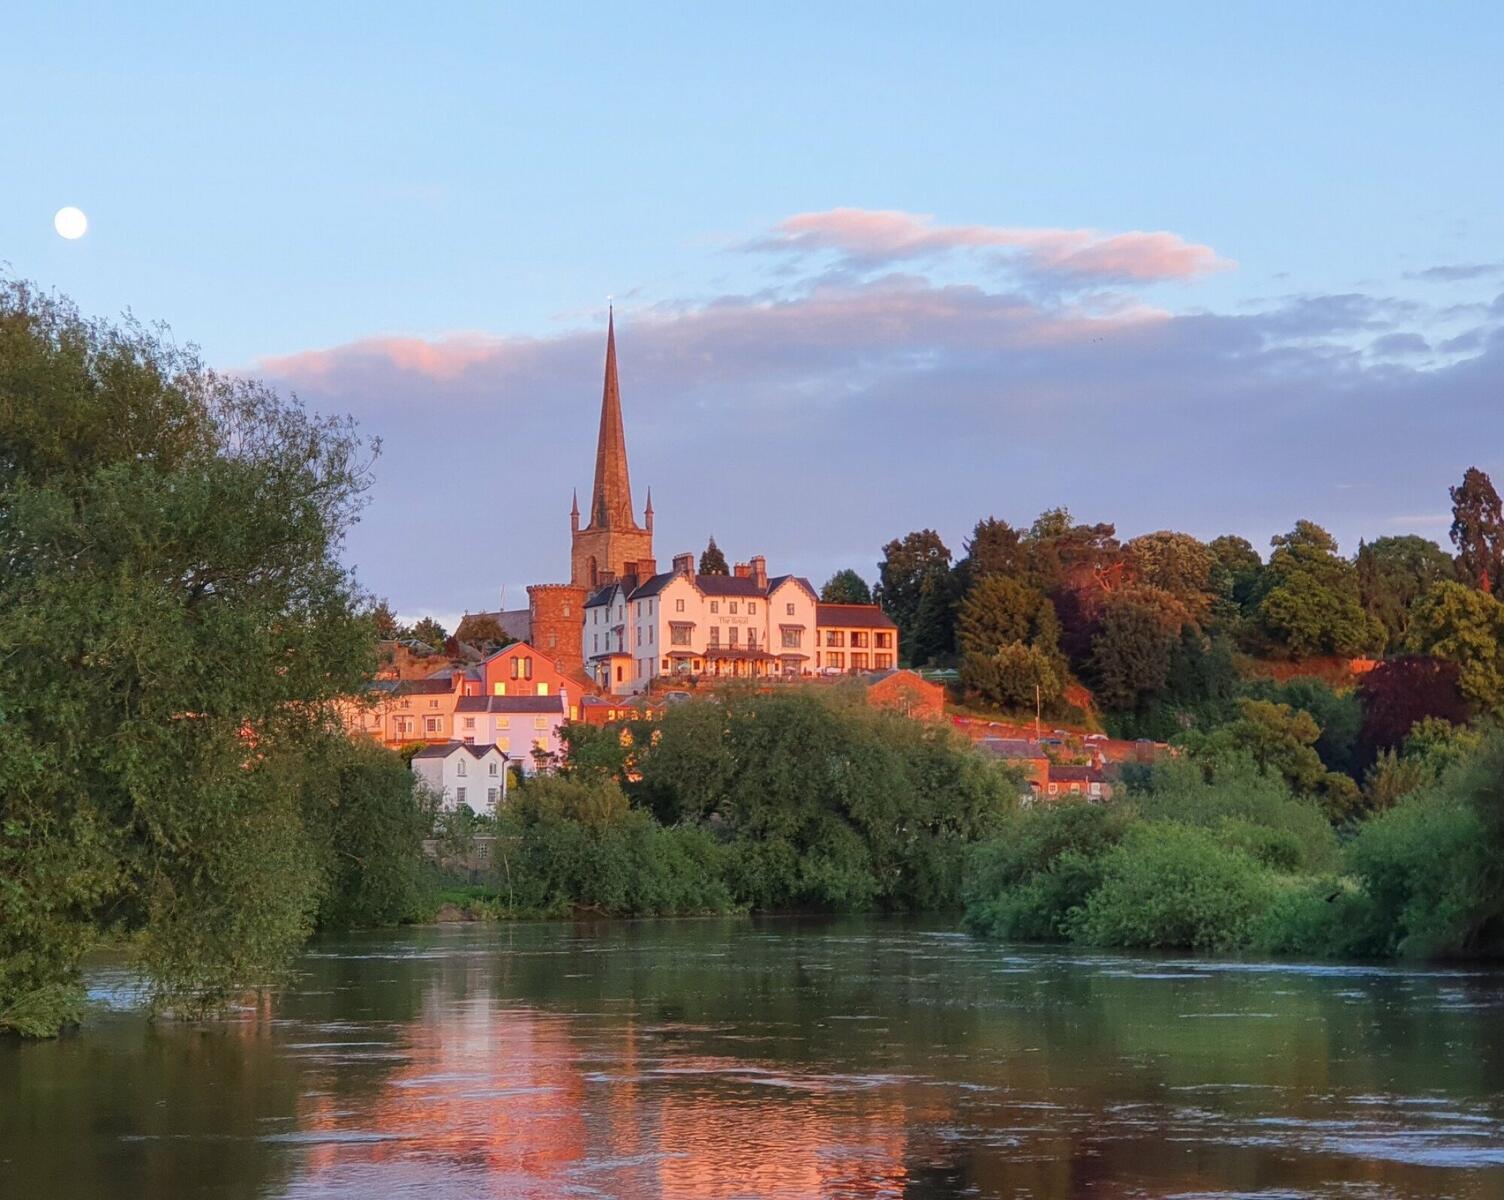 Paddle to, from or through Ross-on-Wye